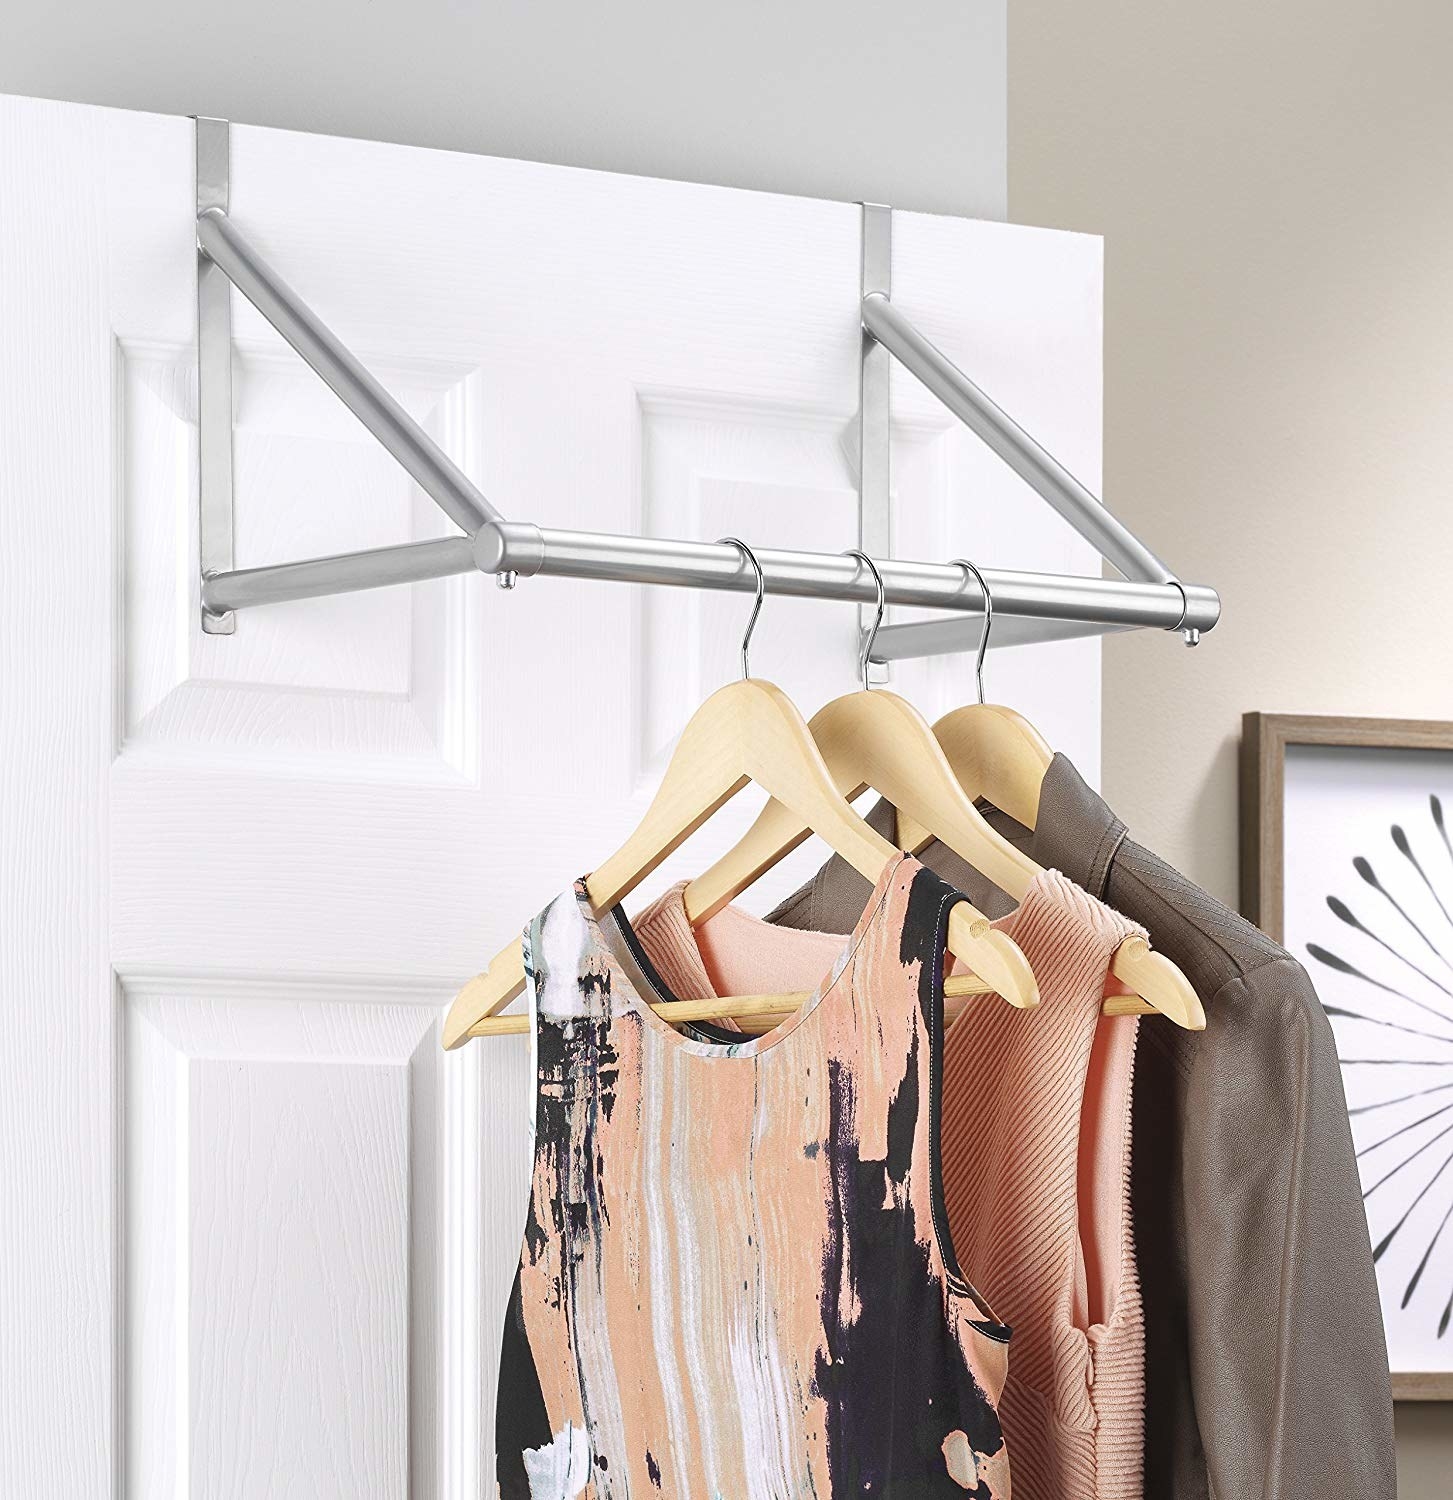 A metal clothing rod hanging from a door There are three hangers with two dresses and a jacket hanging from it